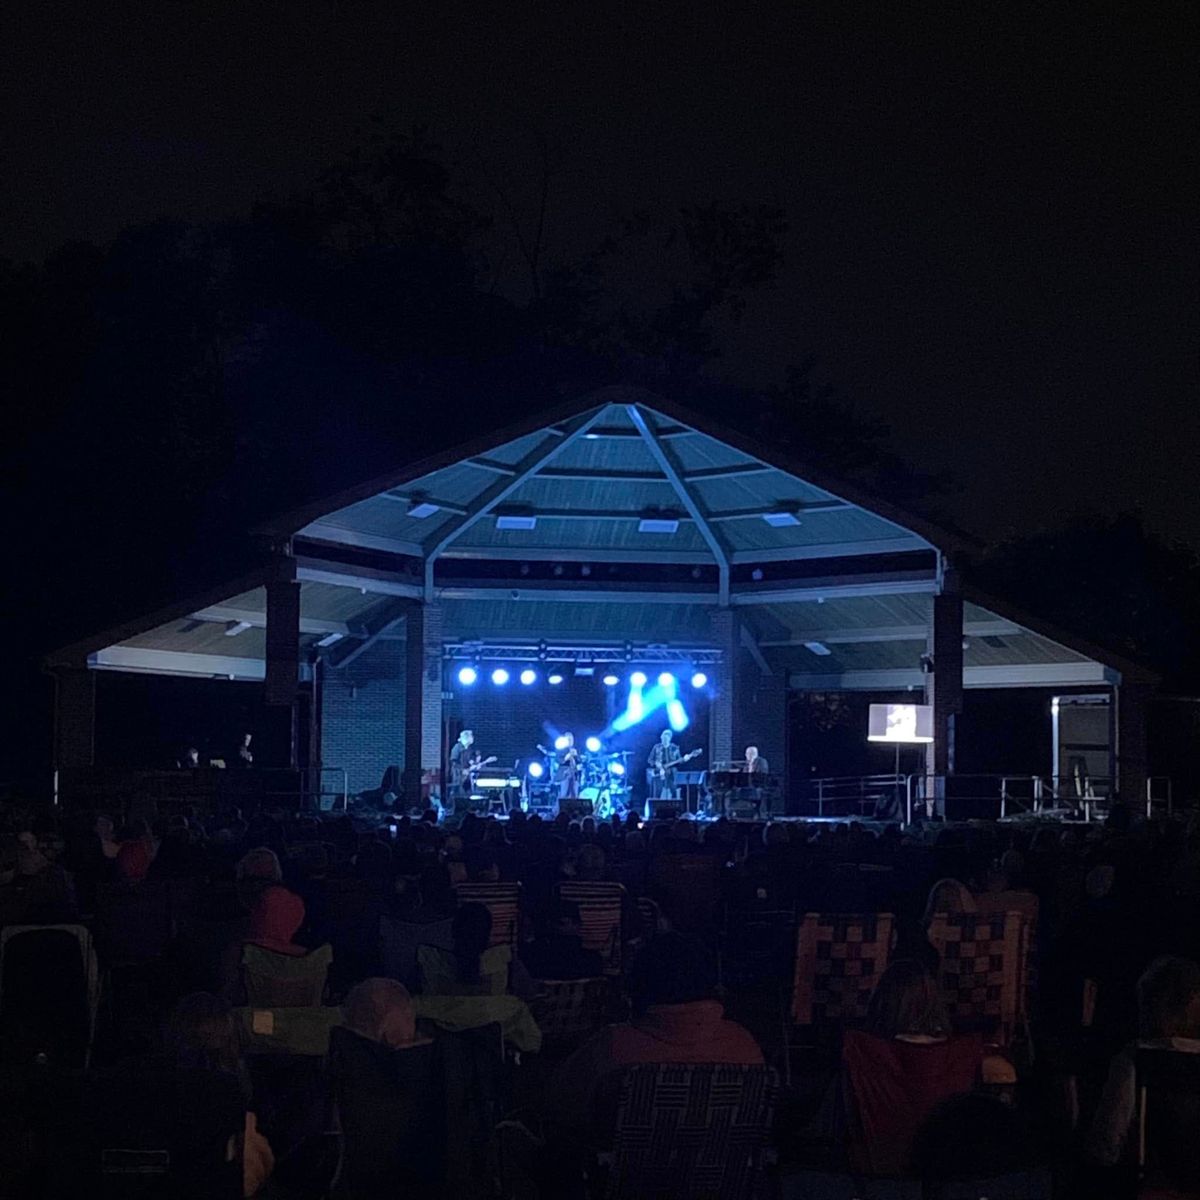 Concert in the Park at Mineola Amphitheater!